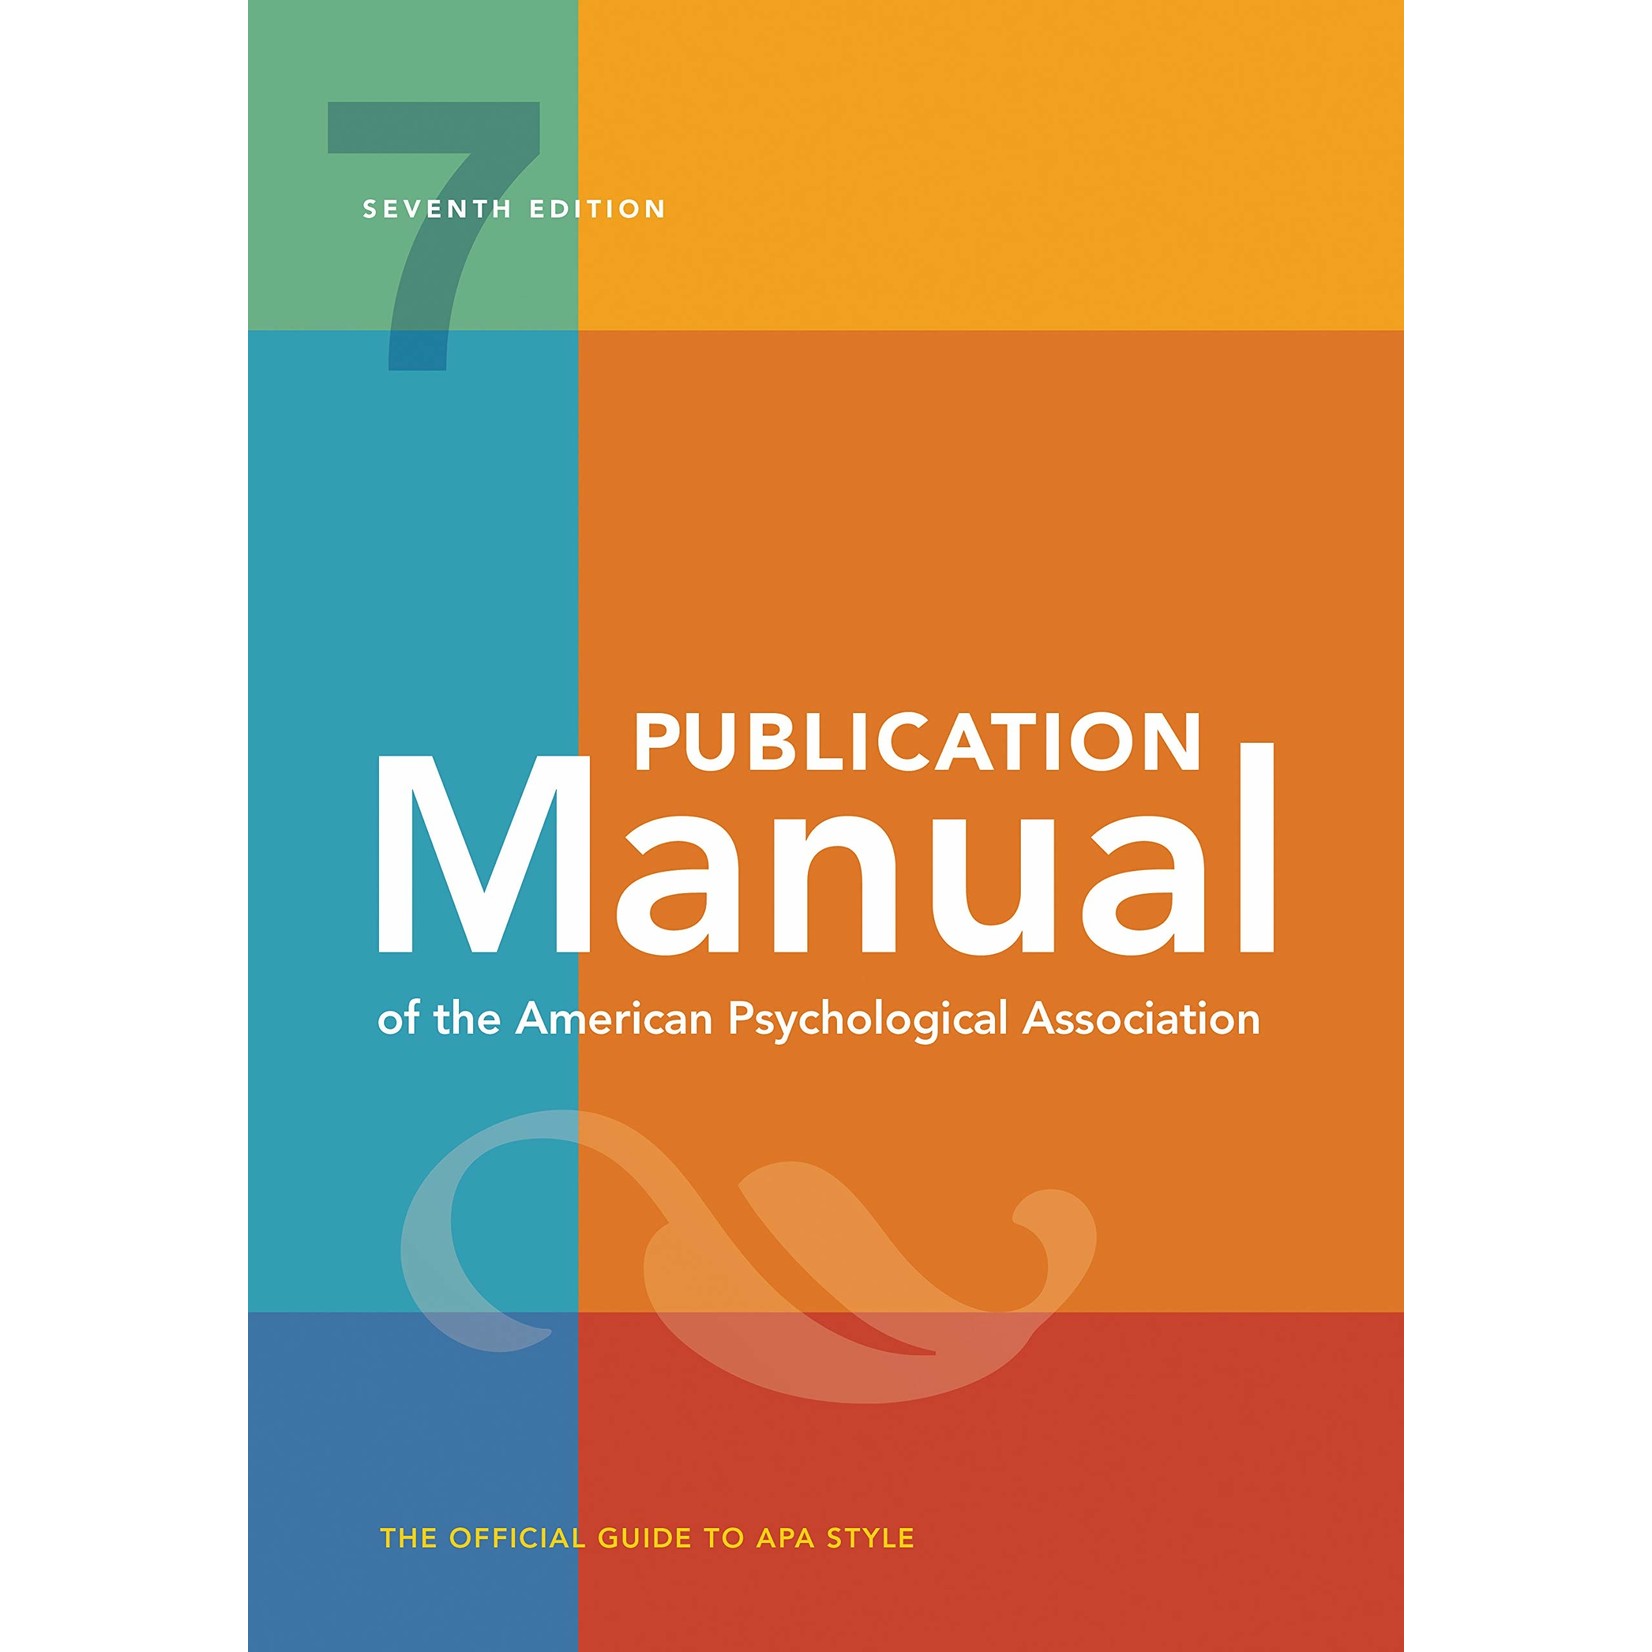 Publication Manual of the American Psychological Association, Seventh Edition (2020) Paperback